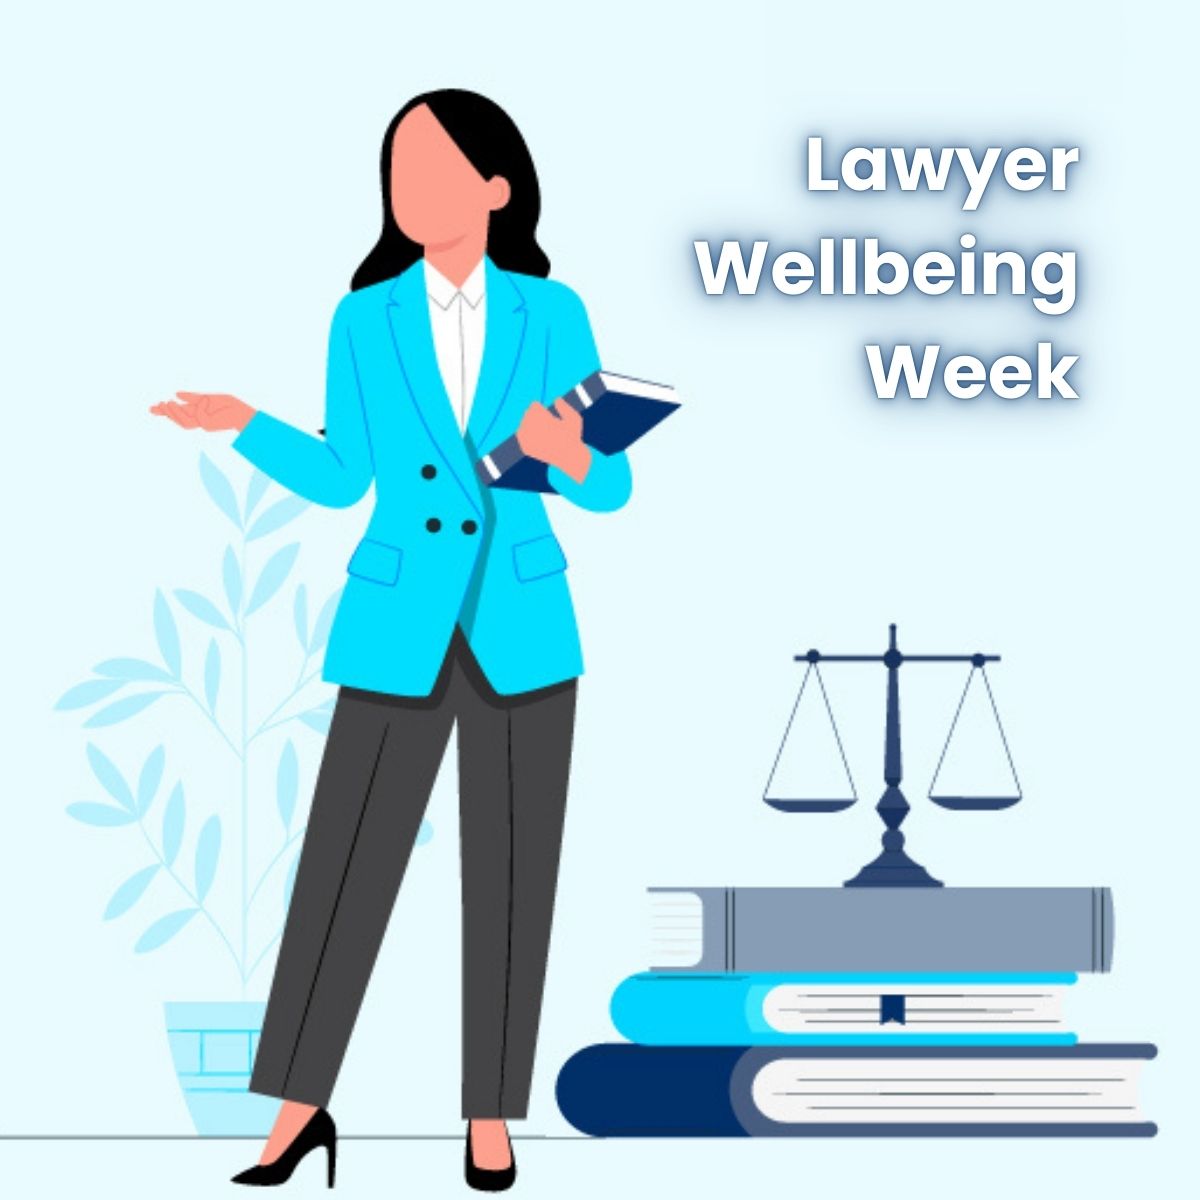 At Epoq, we recognize the importance of mental health and balance in the legal profession by making law easy.

#LawyerWellbeingWeek #LegalTech #MentalHealthMatters